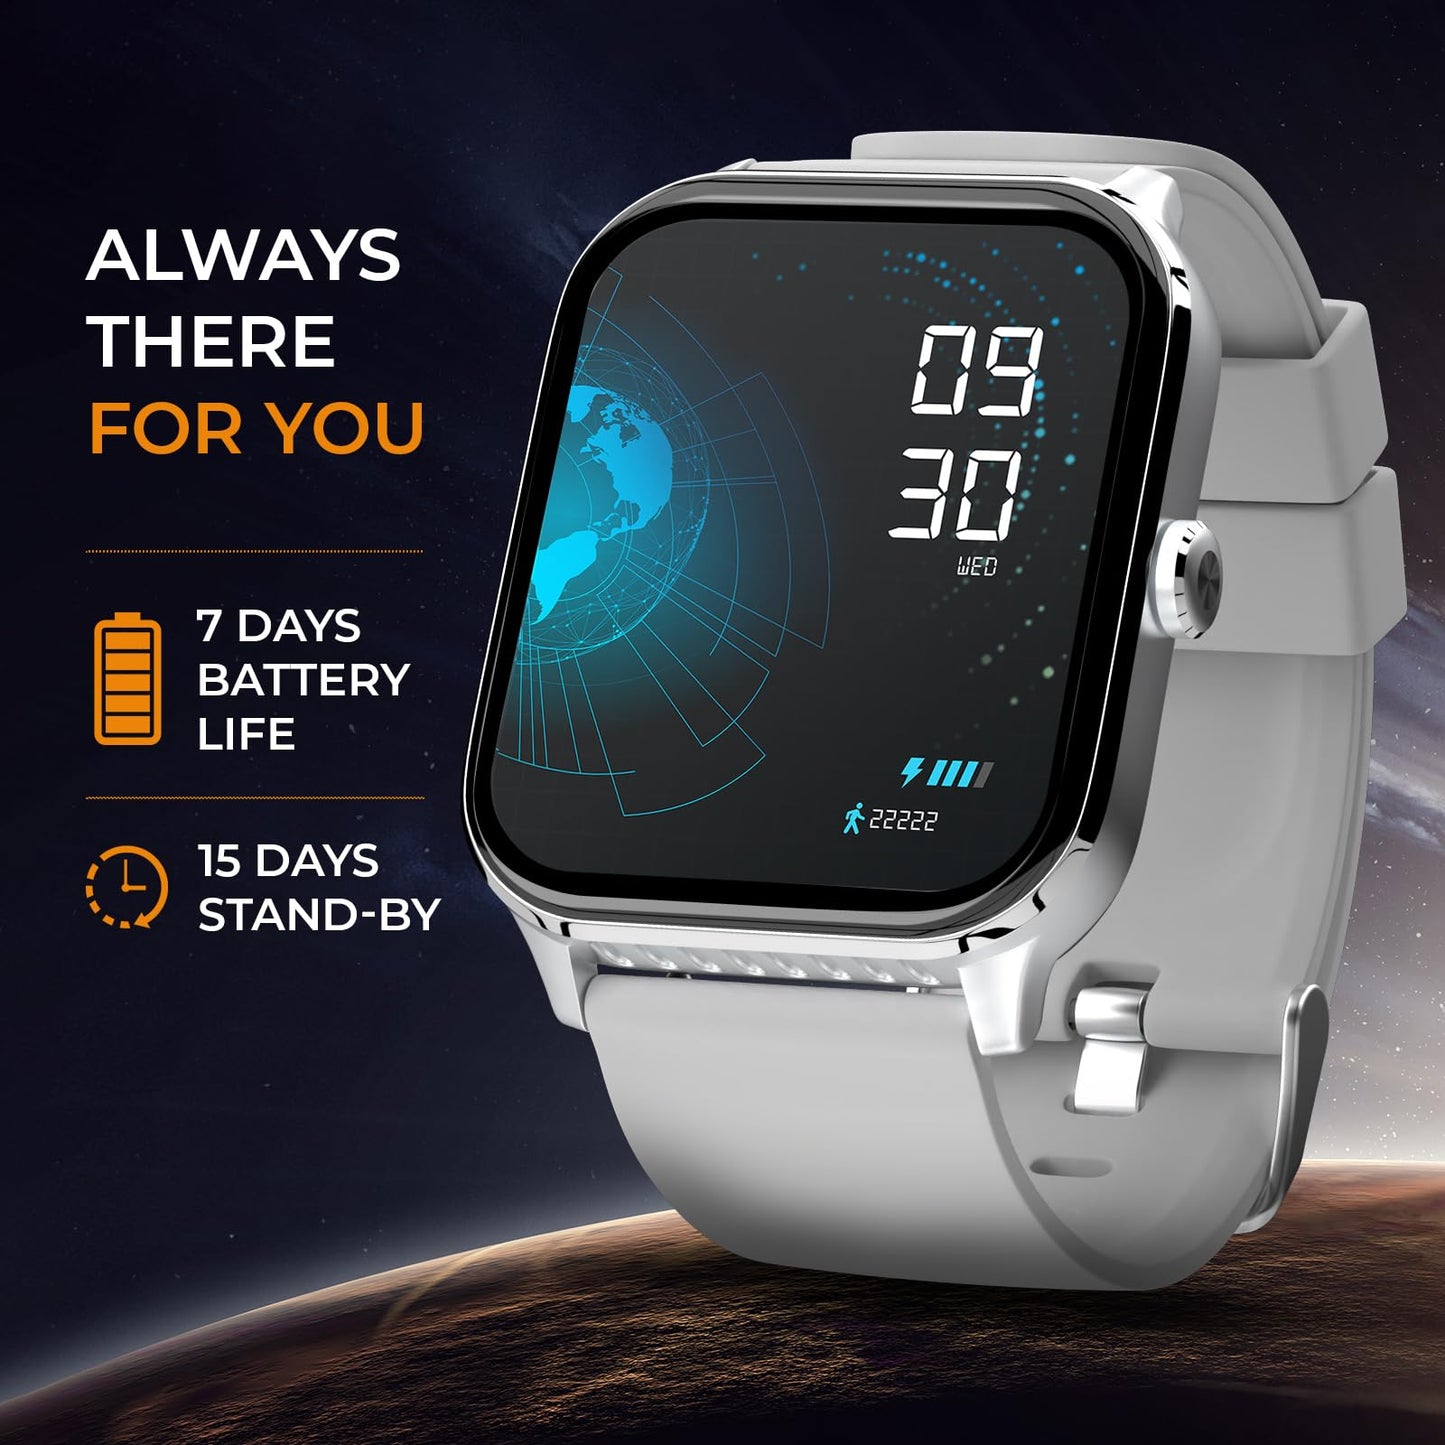 beatXP Marv 1.85 (4.5 cm) HD Display Smart Watch with Bluetooth Calling, AI Voice Assistance, Heart Rate, spo2, Sleep Monitoring, 100+ Sports Modes, IP68 Water Resistance (Silver)